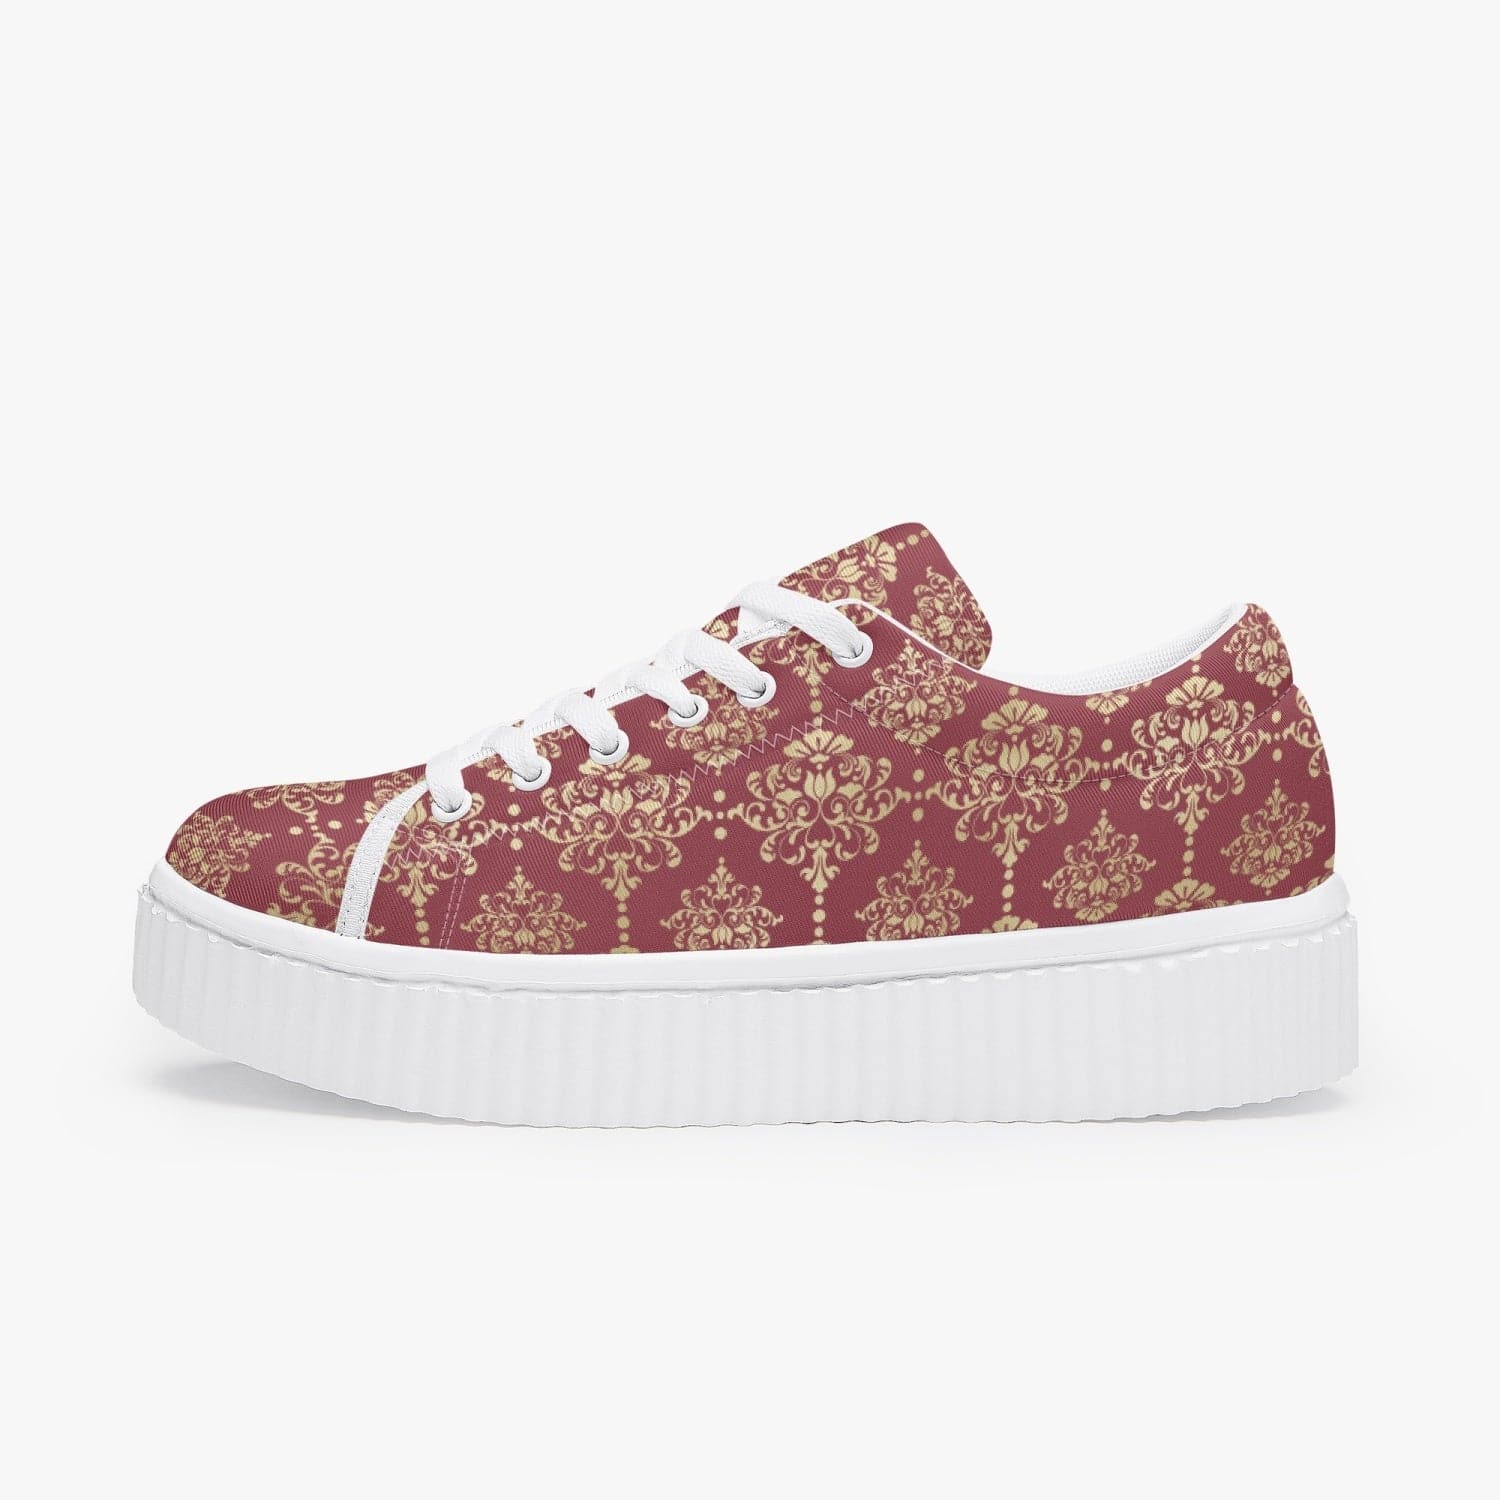 Red and gold Stylish 2022 Women’s Low Top Platform Sneakers, by Sensus Studio Design